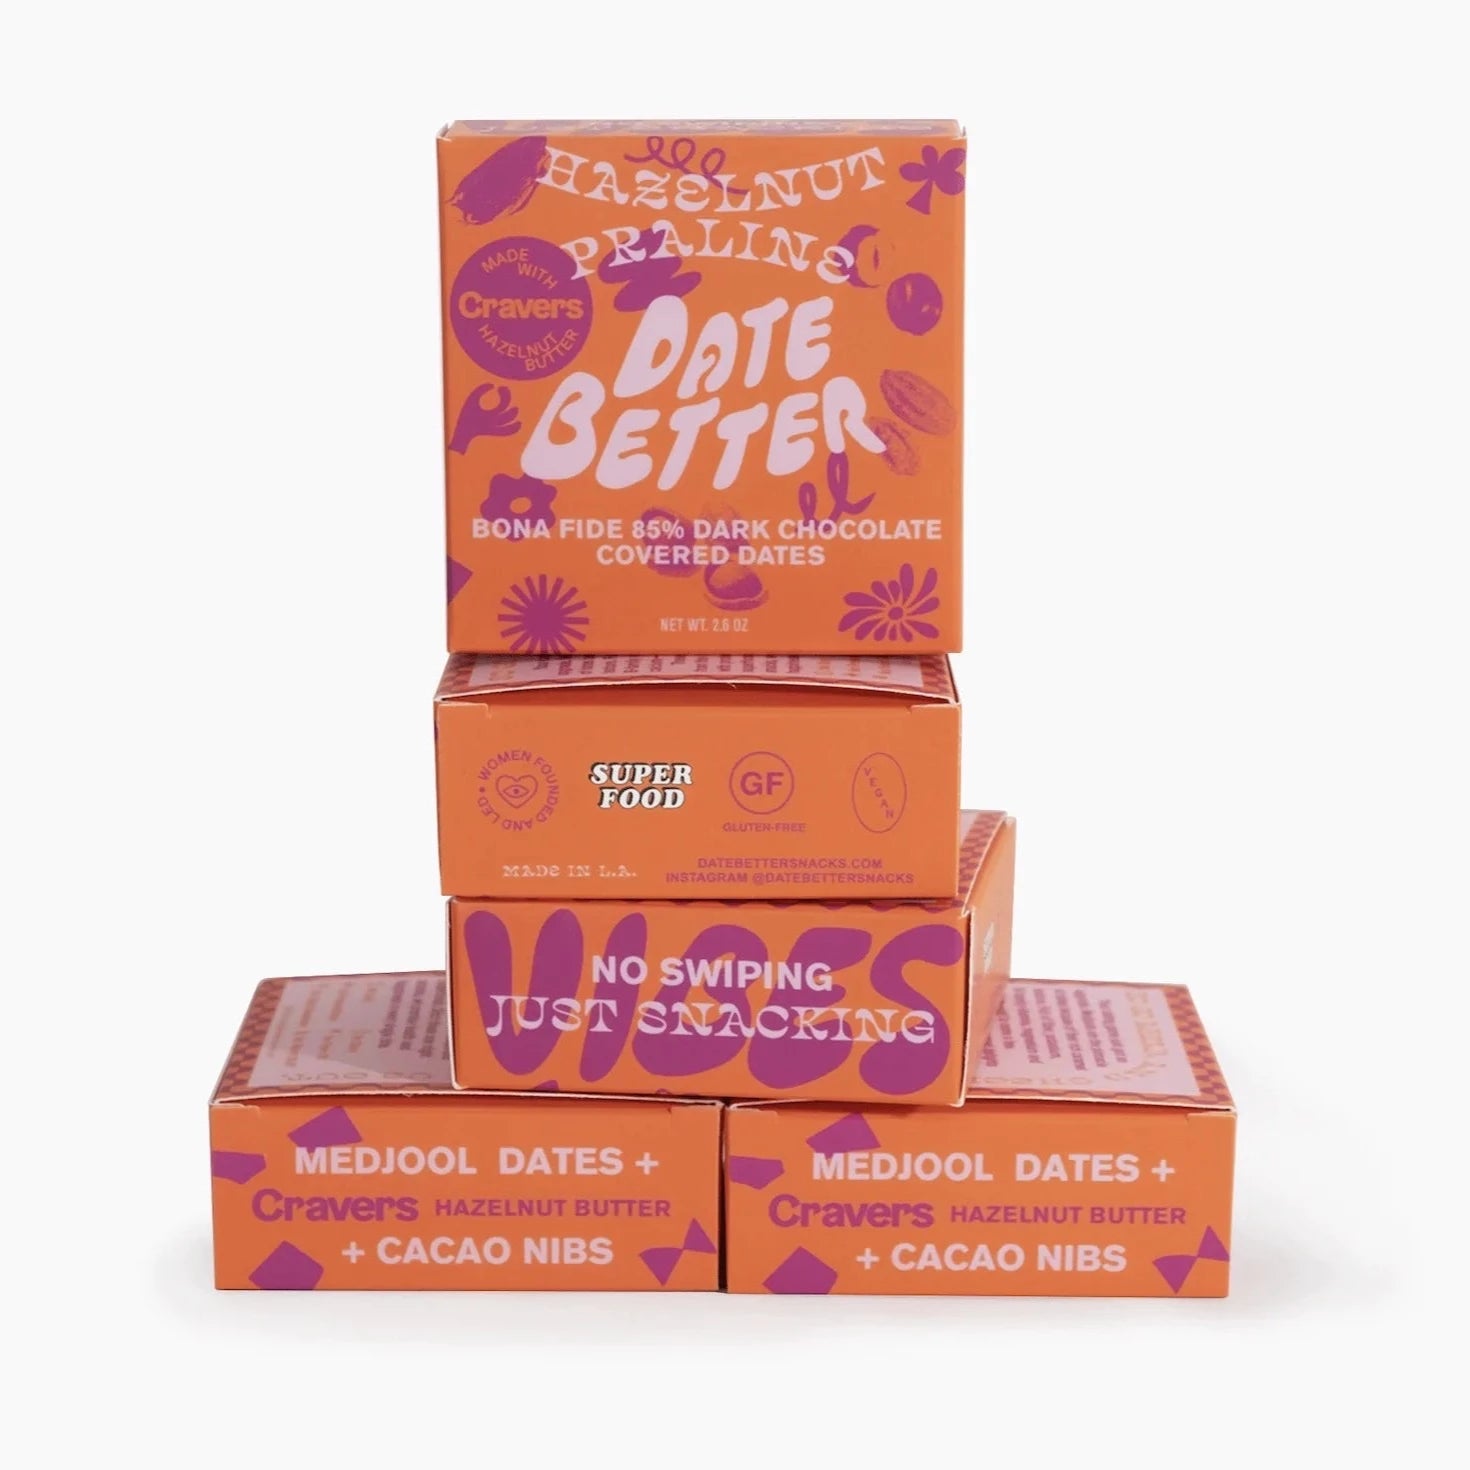 Orange square box with purple illustrations all over it. Text is on the front and in white. Text Reads "hazelnut praline date better bonafide 85% dark chocolate covered dates"